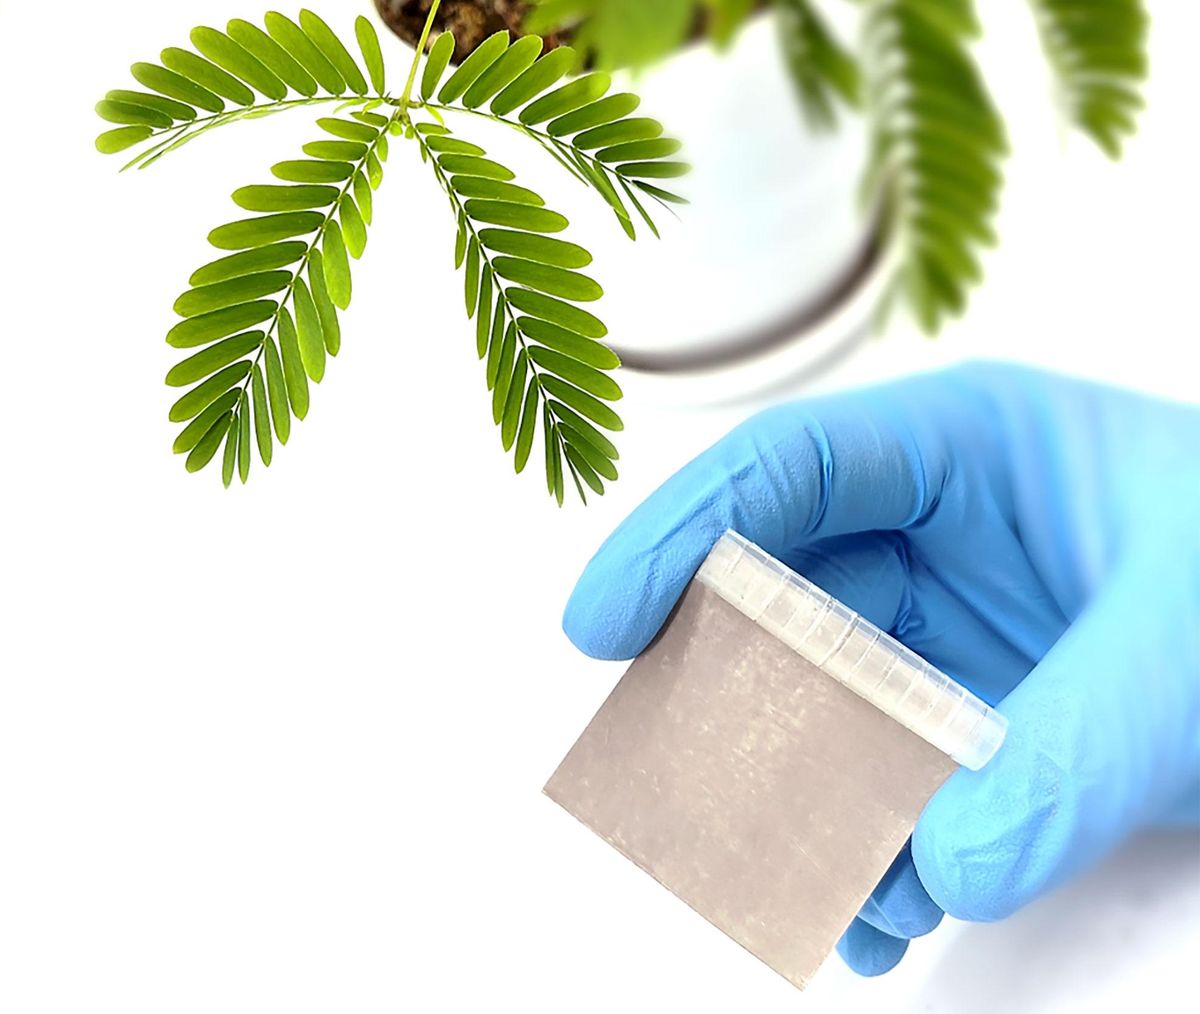 A blue-gloved hand holds a grey square in front of a green plant.